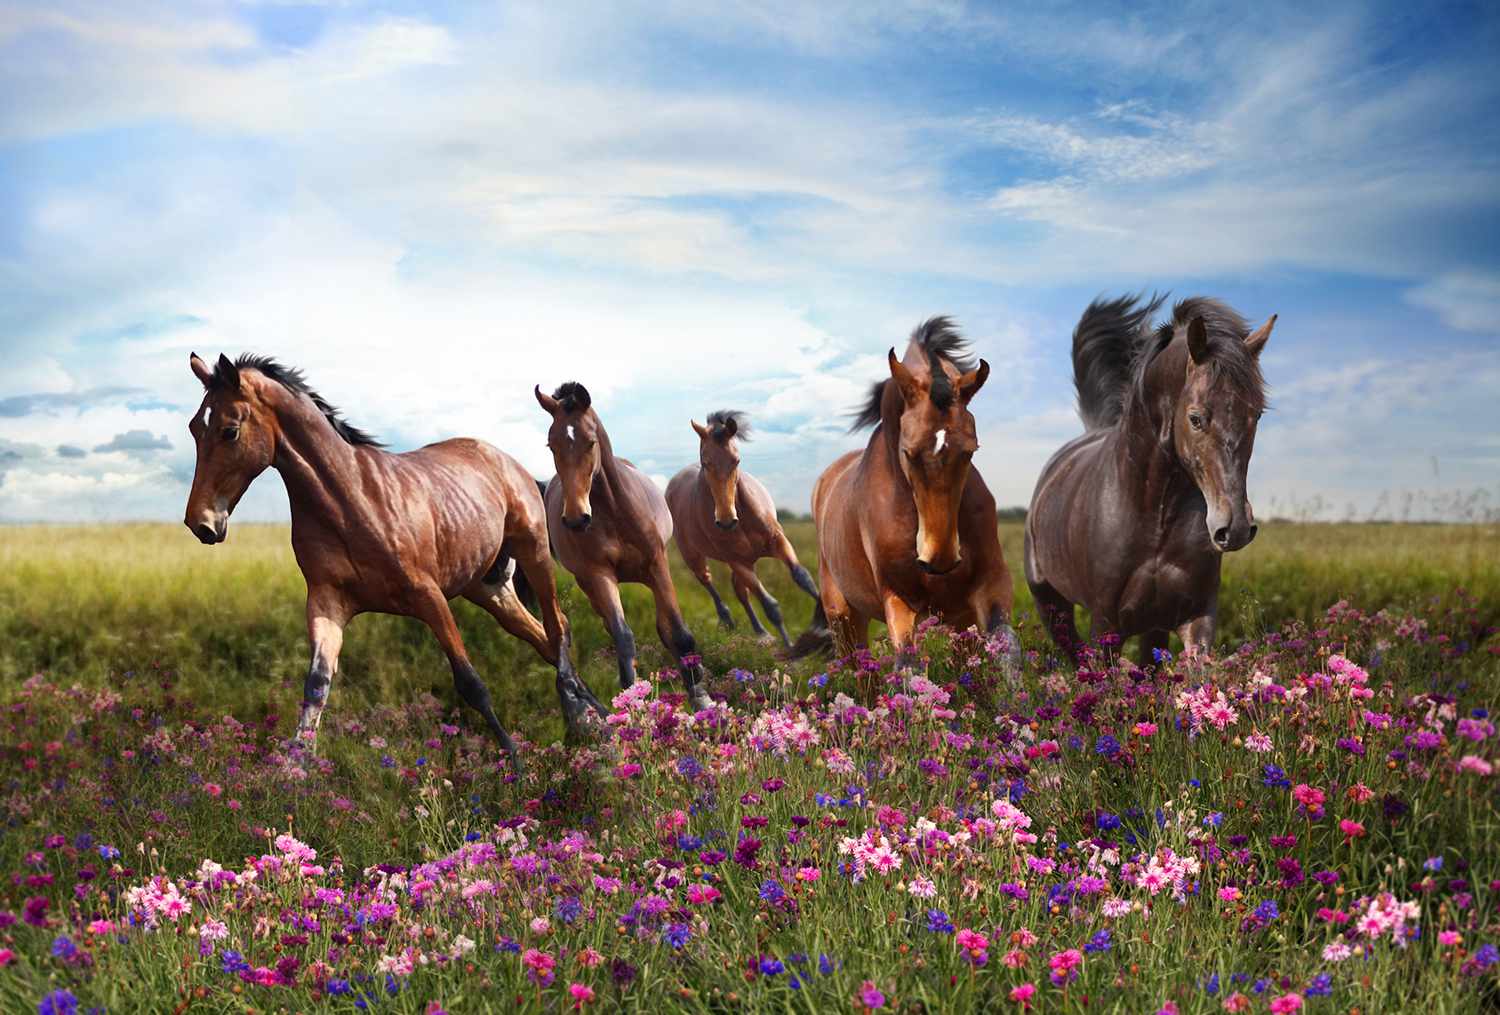 Horses Quickly Jump on a Flowering Meadow